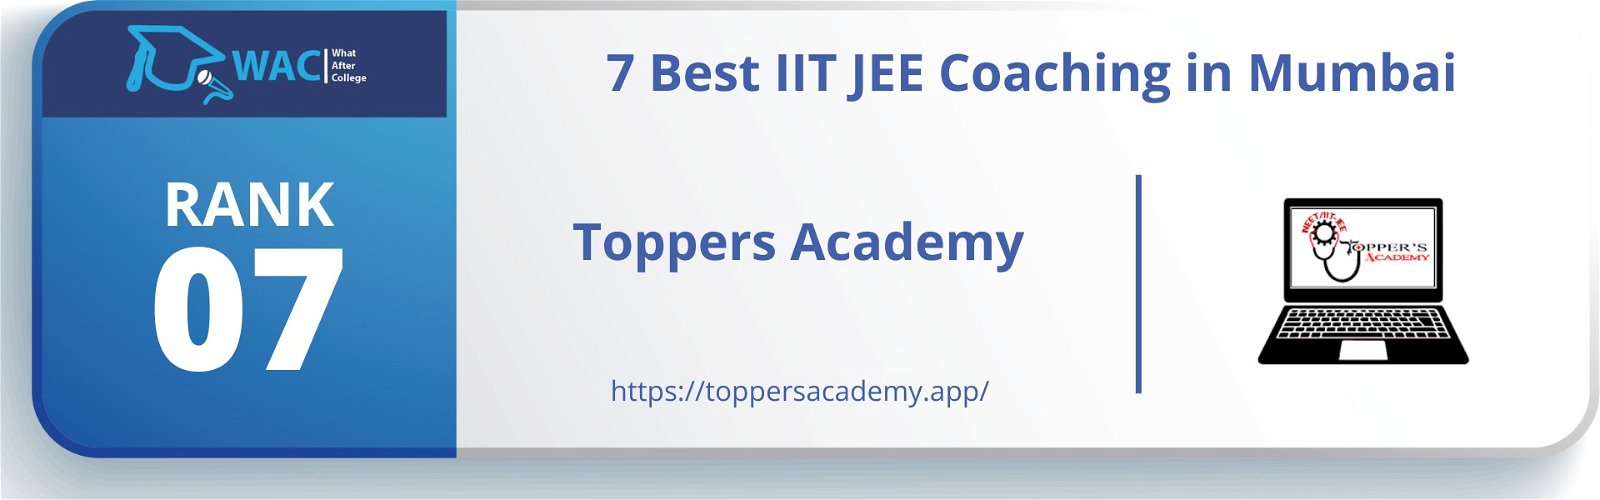 Rank 7: Toppers Academy